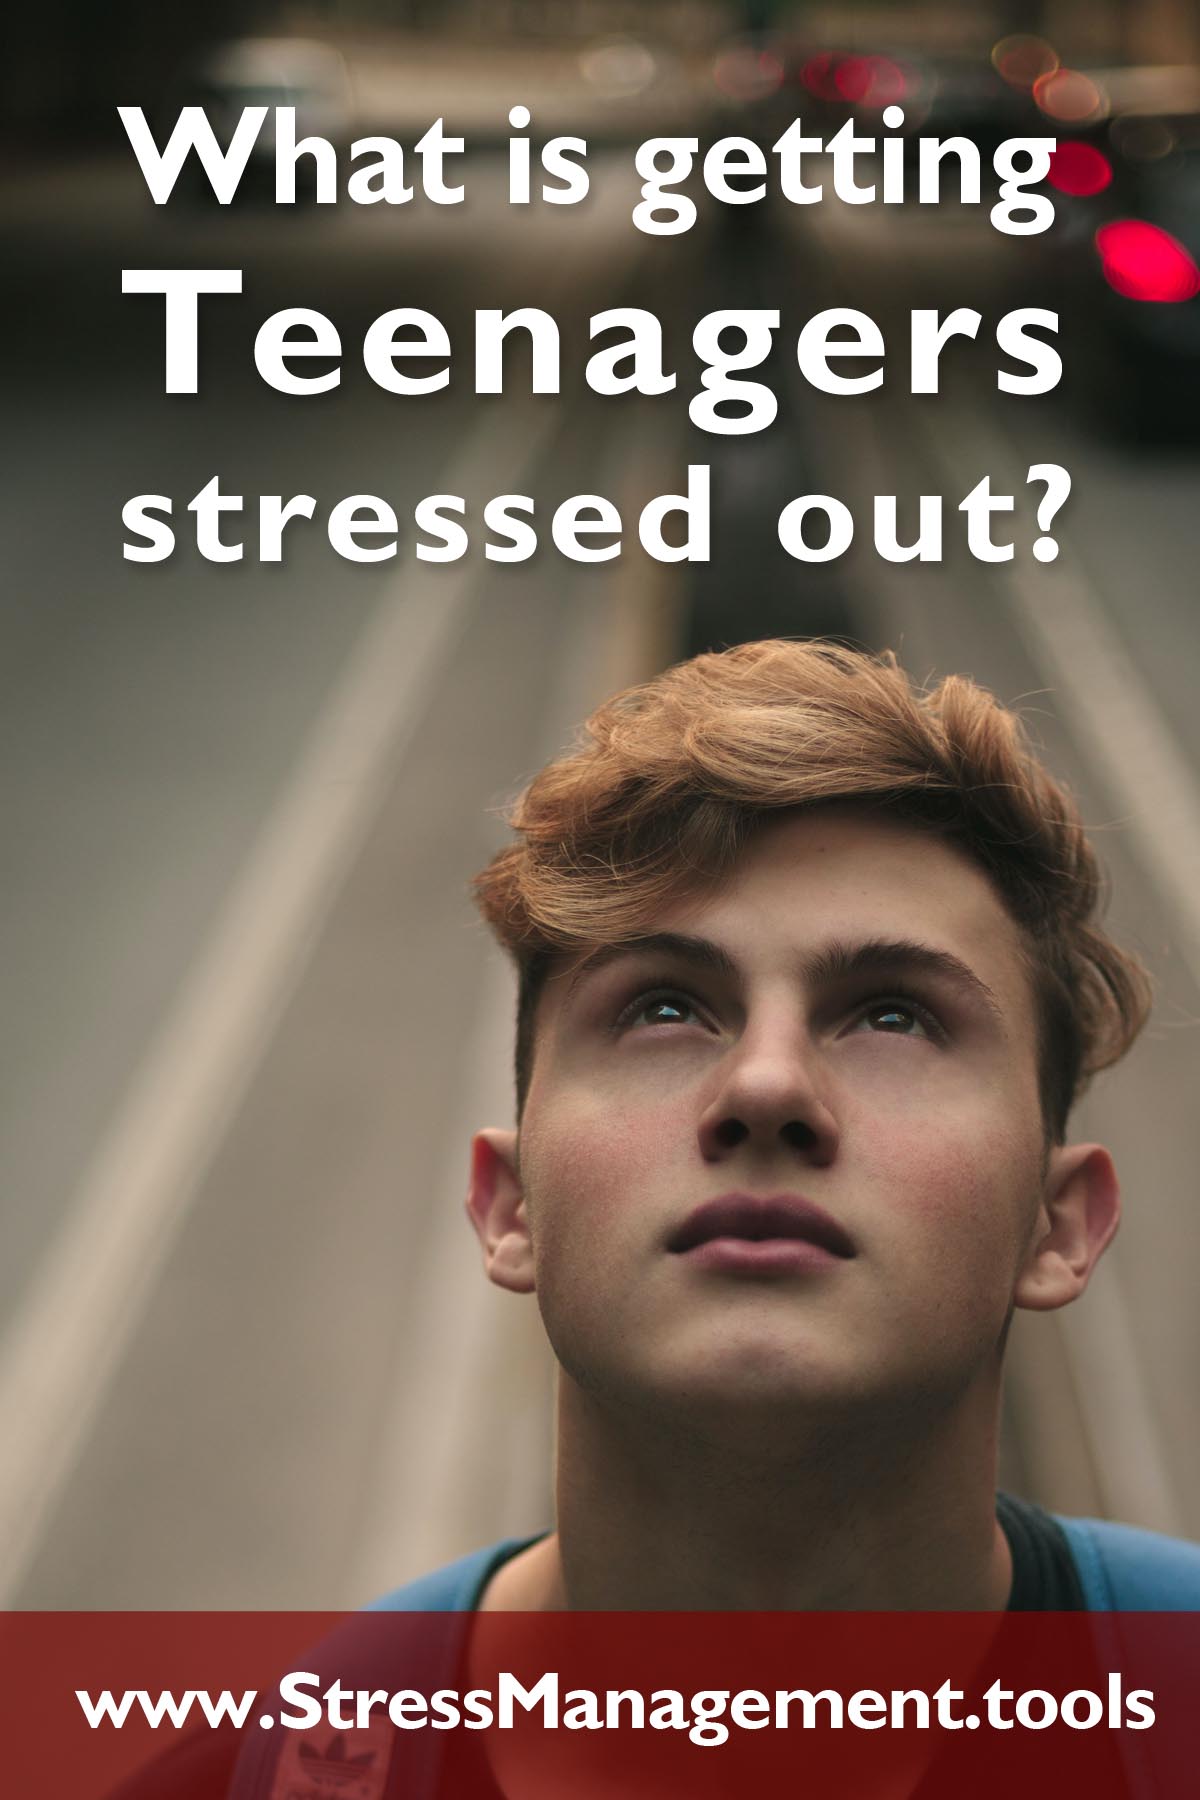 What is getting Teenagers stressed out?